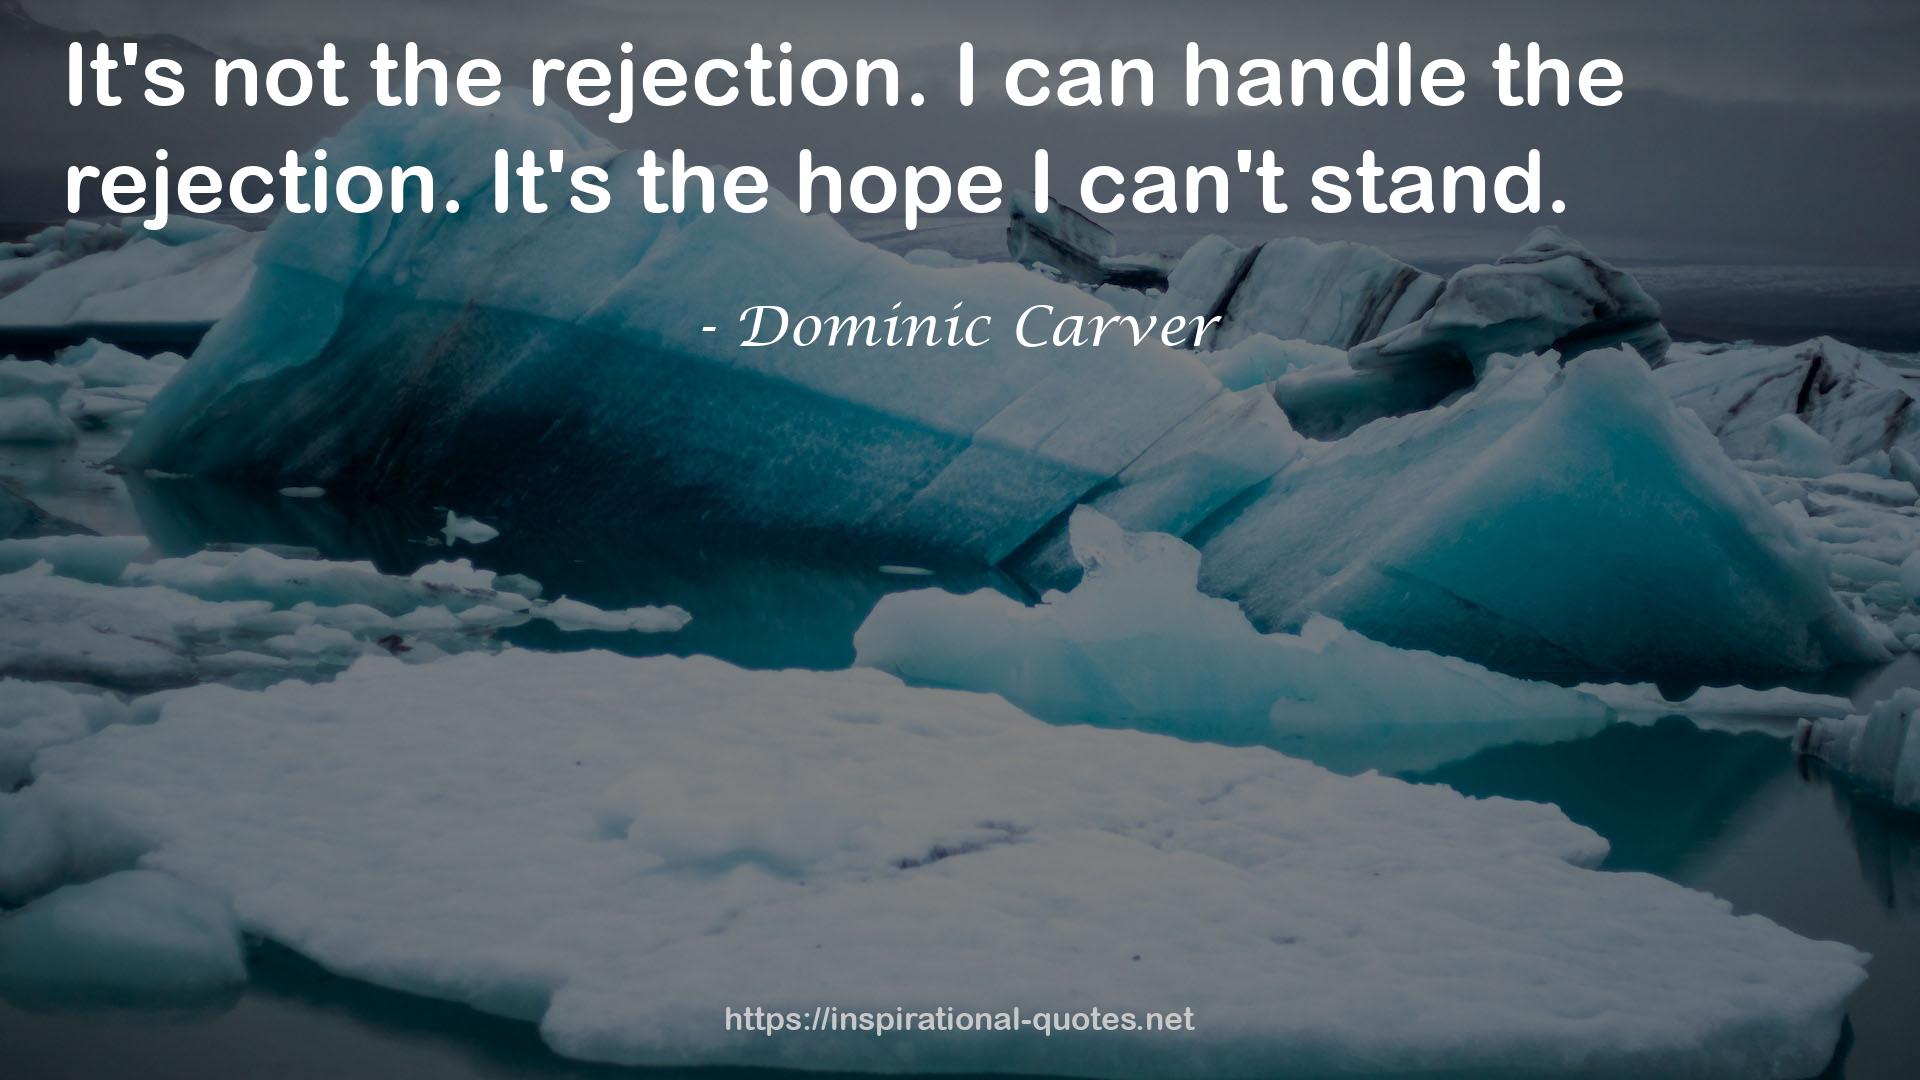 Dominic Carver QUOTES